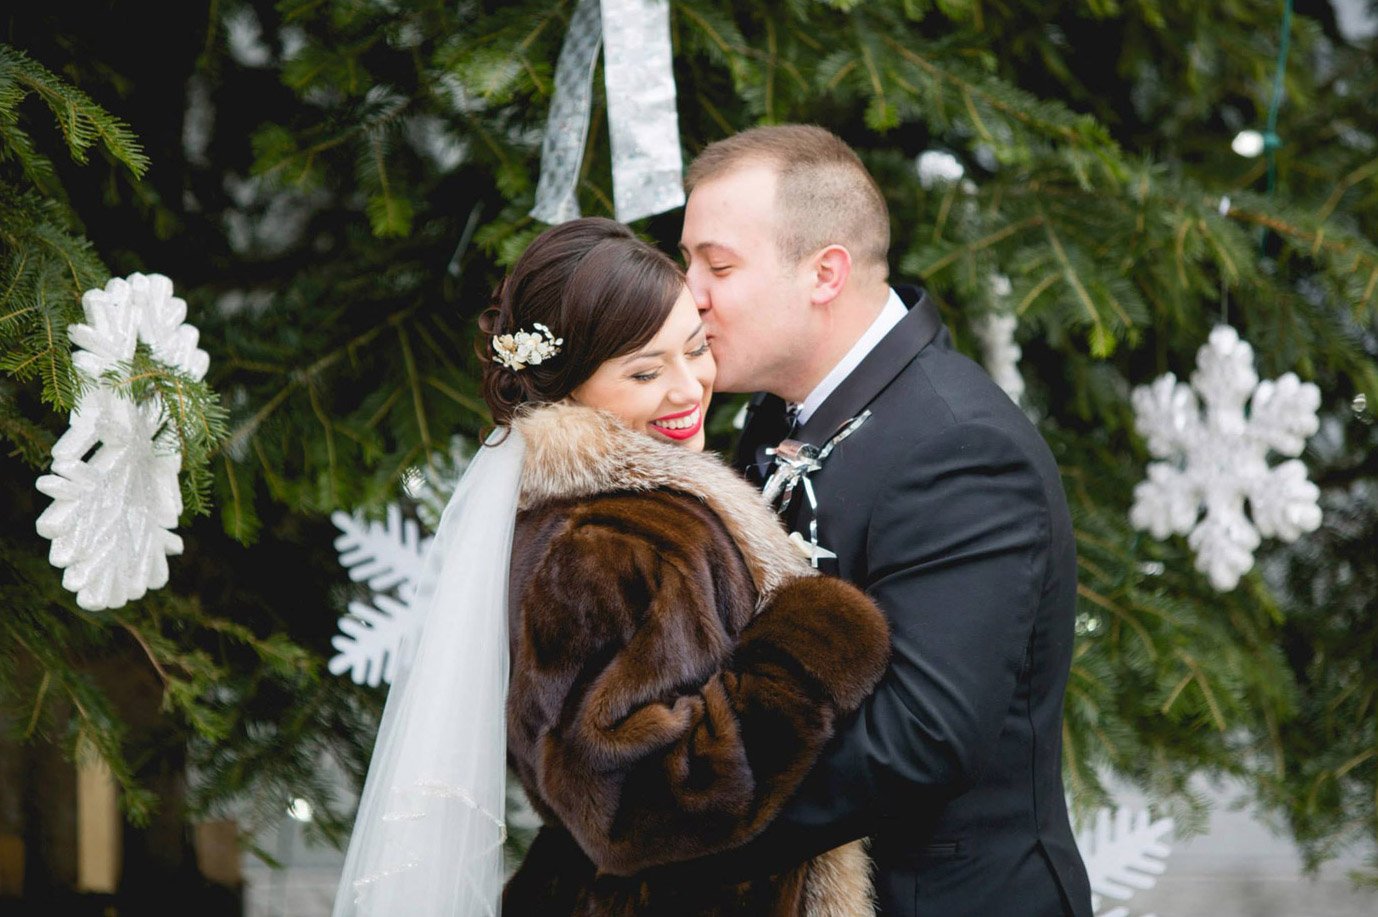 Winter Wedding at Scranton Cultural Center by DPNAK Events, Photo by Icarus Images